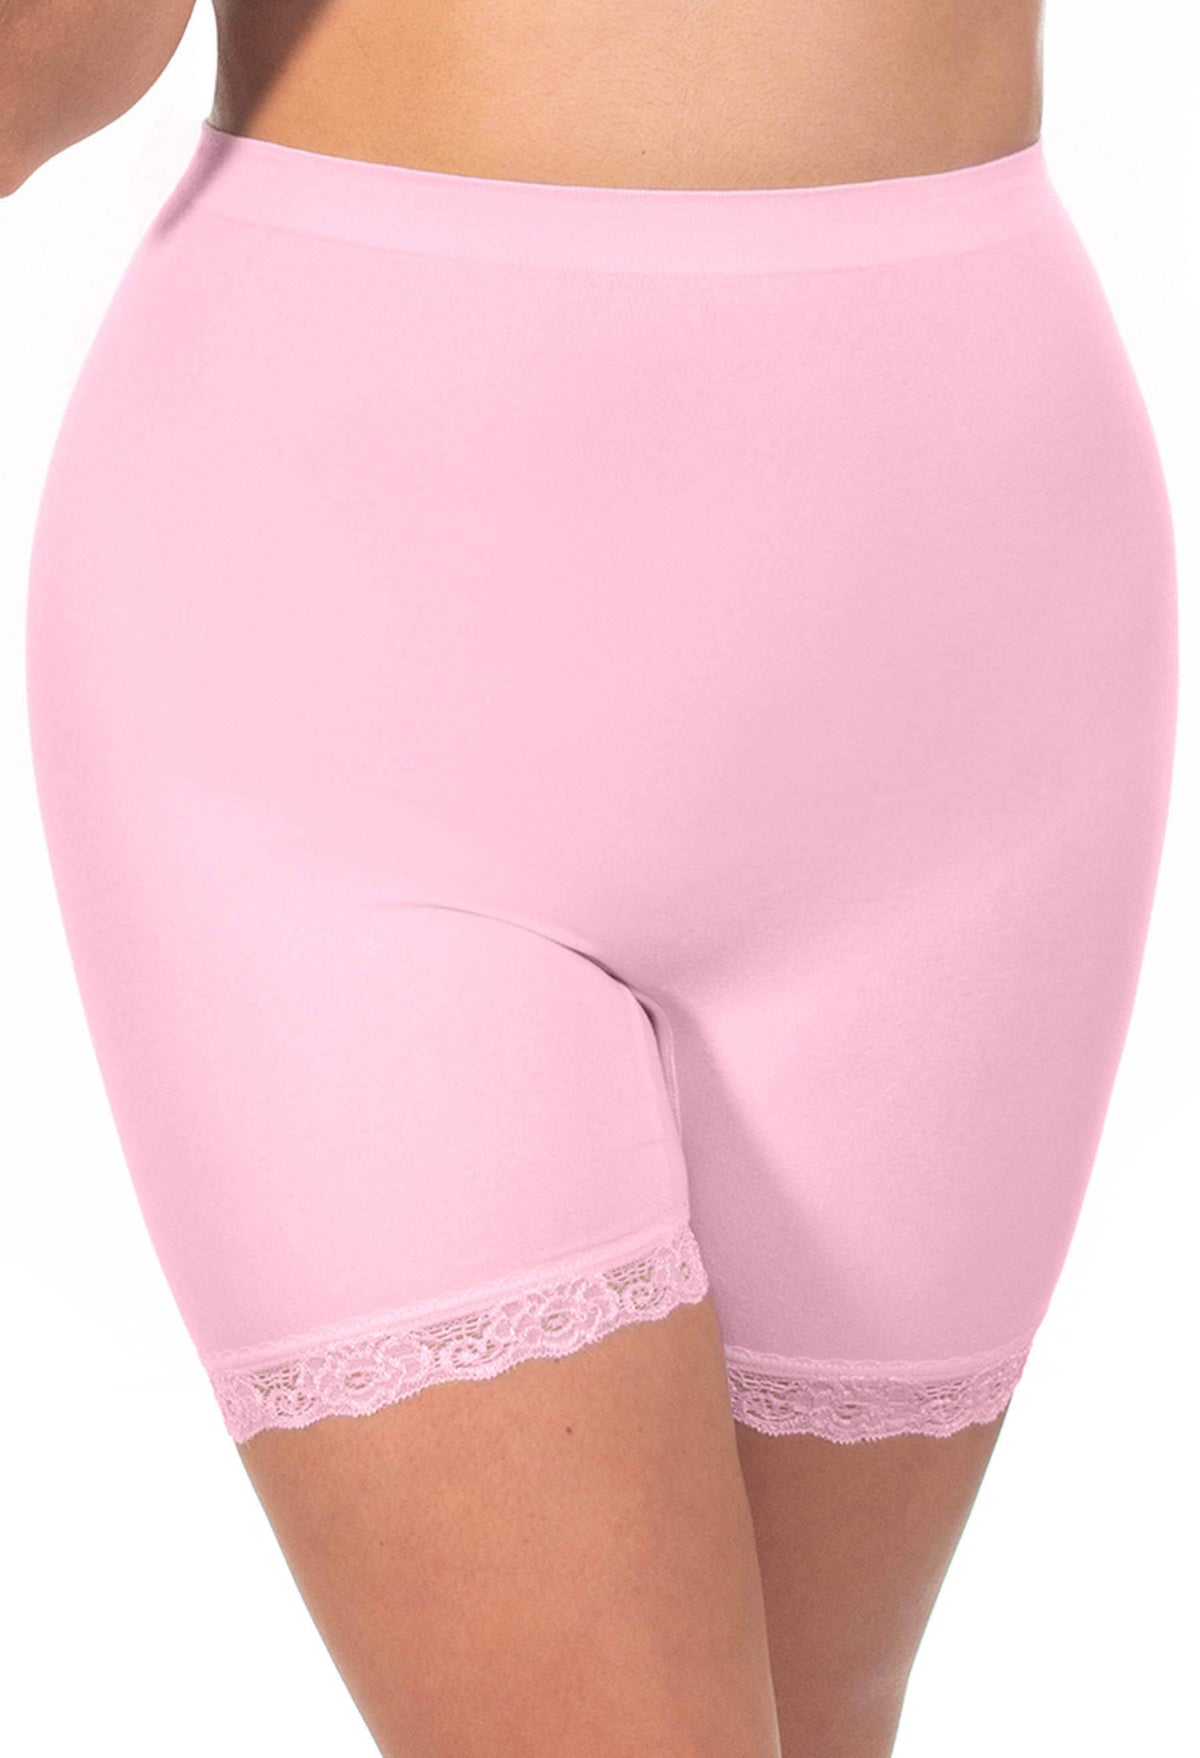 Anti Chafing High Rise Petite Cotton Shorts - 7 Pack